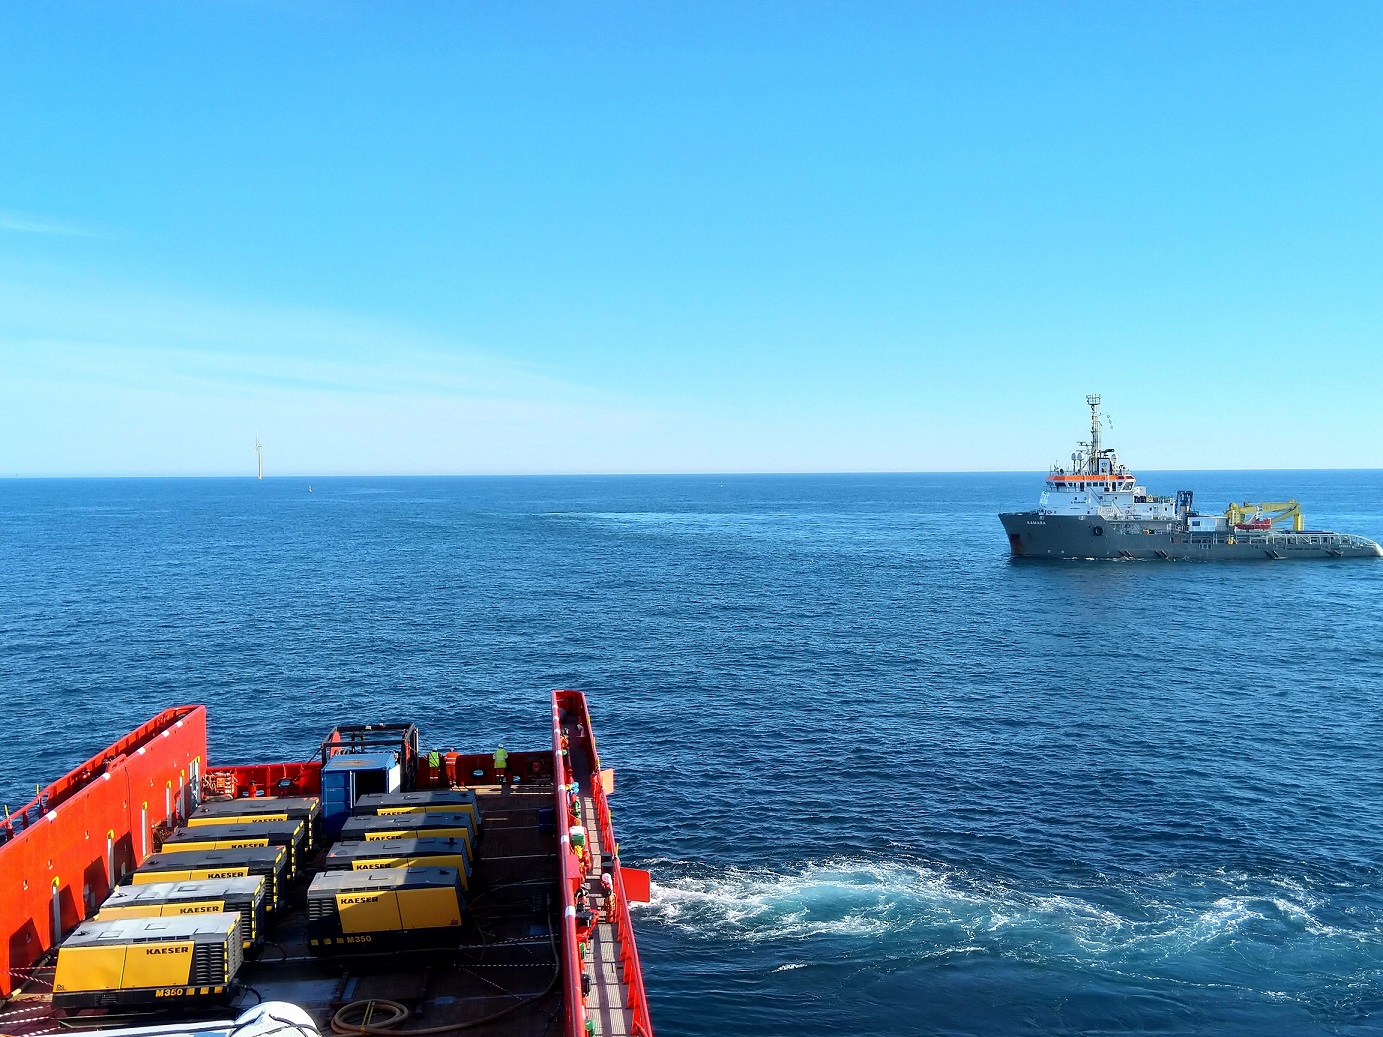 VOS Paradise at work for Weyres Offshore